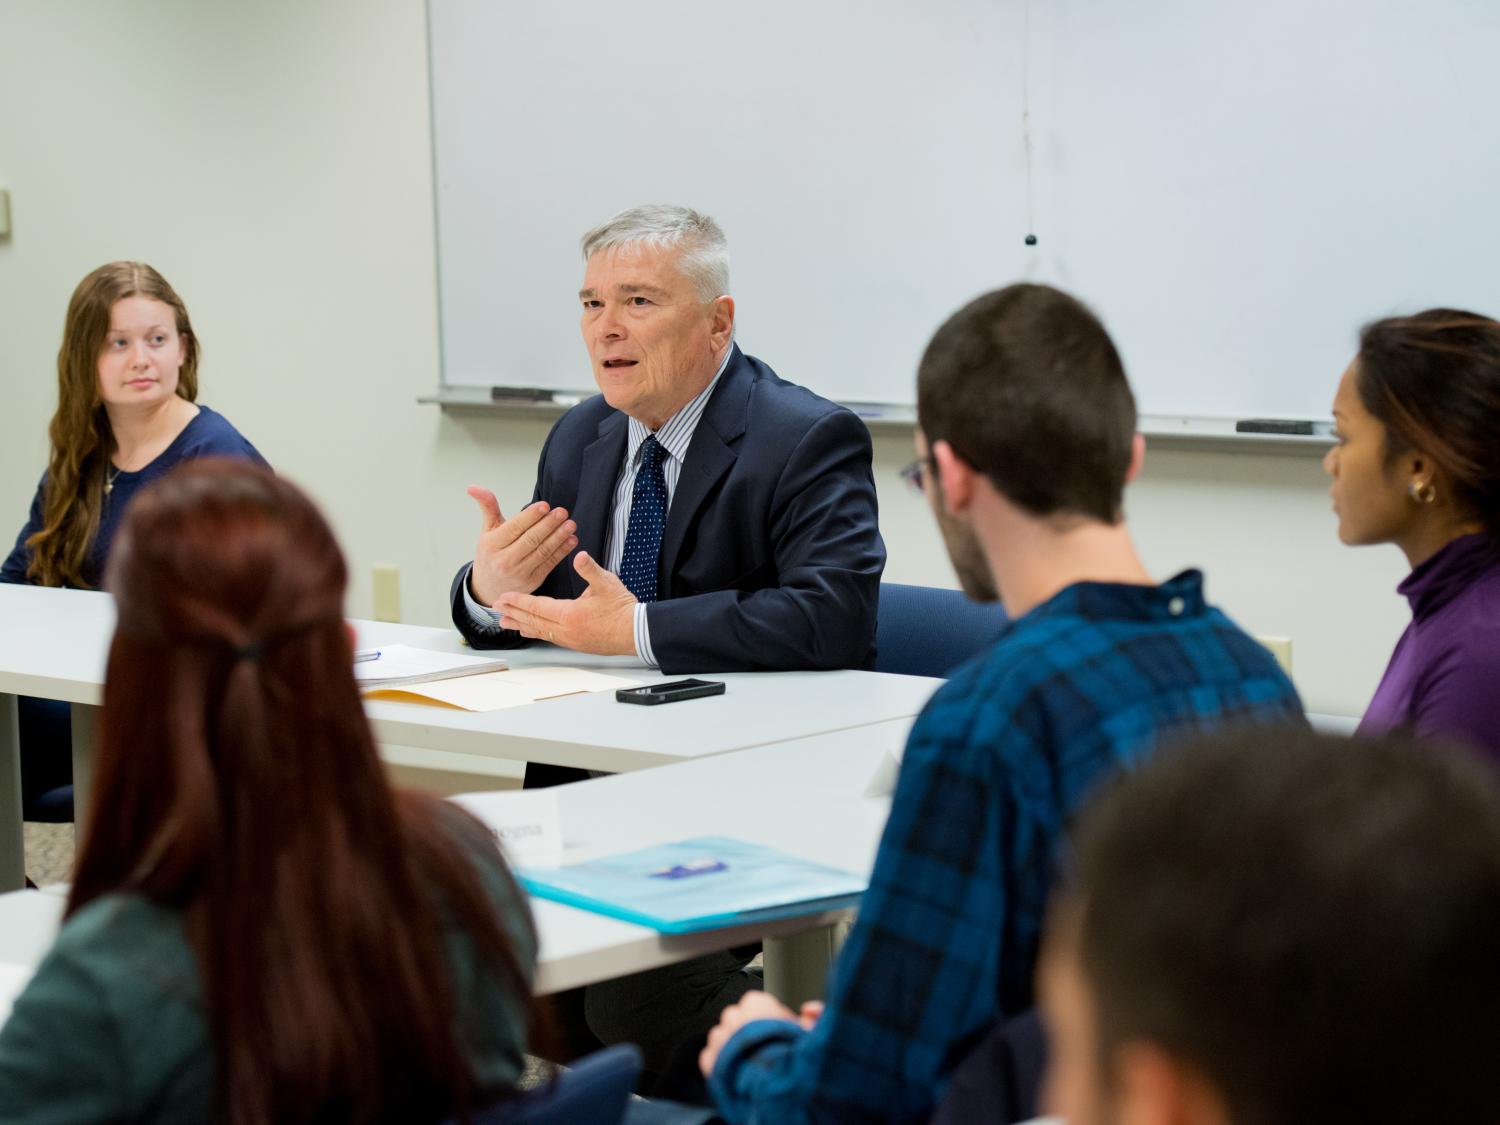 Penn State President Eric Barron sits alongside students at the front of a classroom, where he is speaking and teaching class.